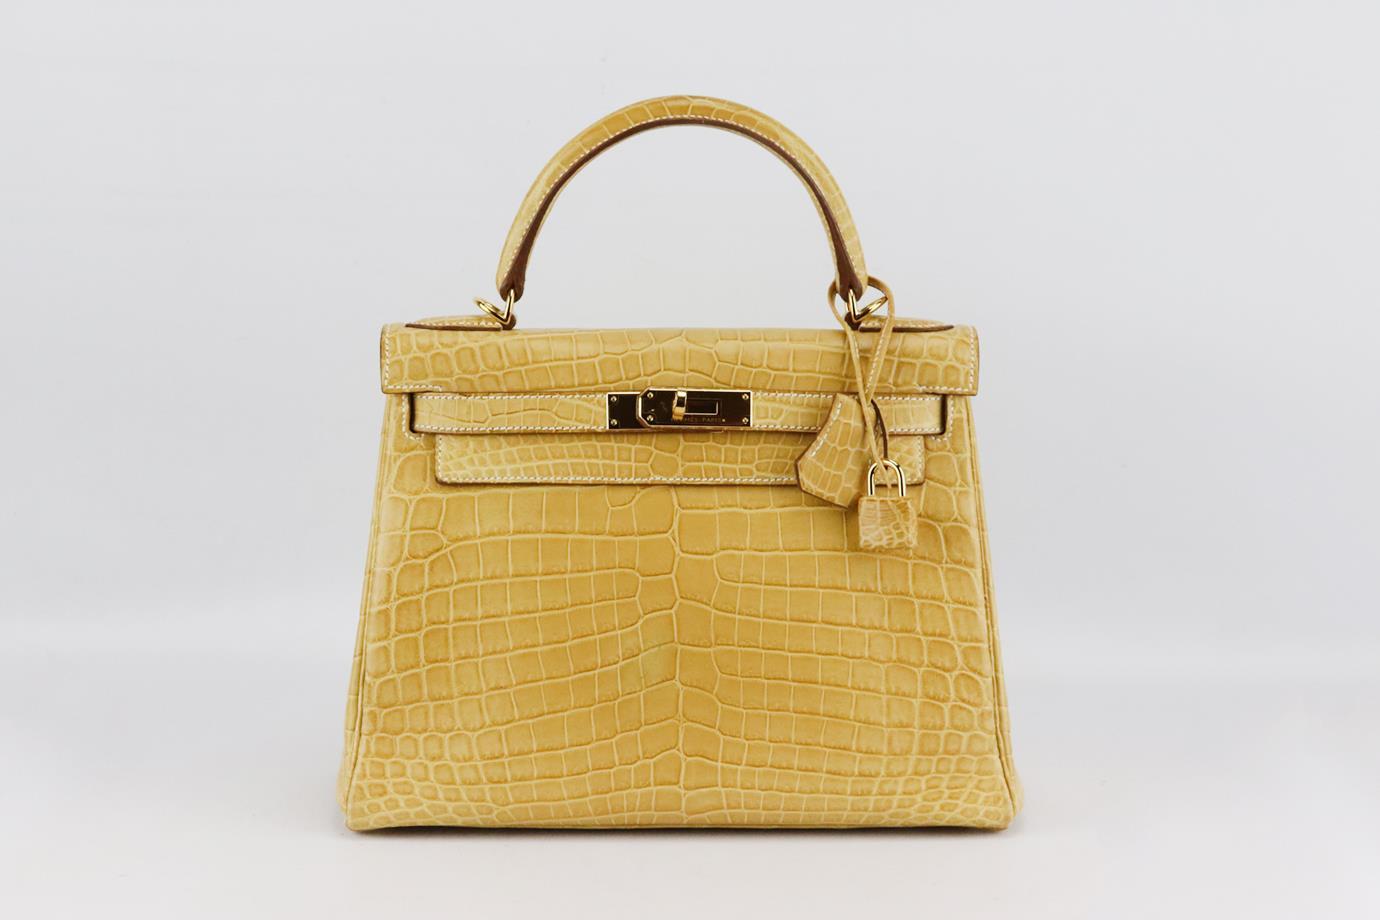 Hermès 2014 Kelly Retourne 28cm Matte Niloticus Crocodile leather bag. Made in France, this beautiful 2014 Hermès ‘Kelly Retourne’ handbag has been made from beige ‘Niloticus Crocodile’ exterior in ‘Paille’ with matching leather interior, this piece